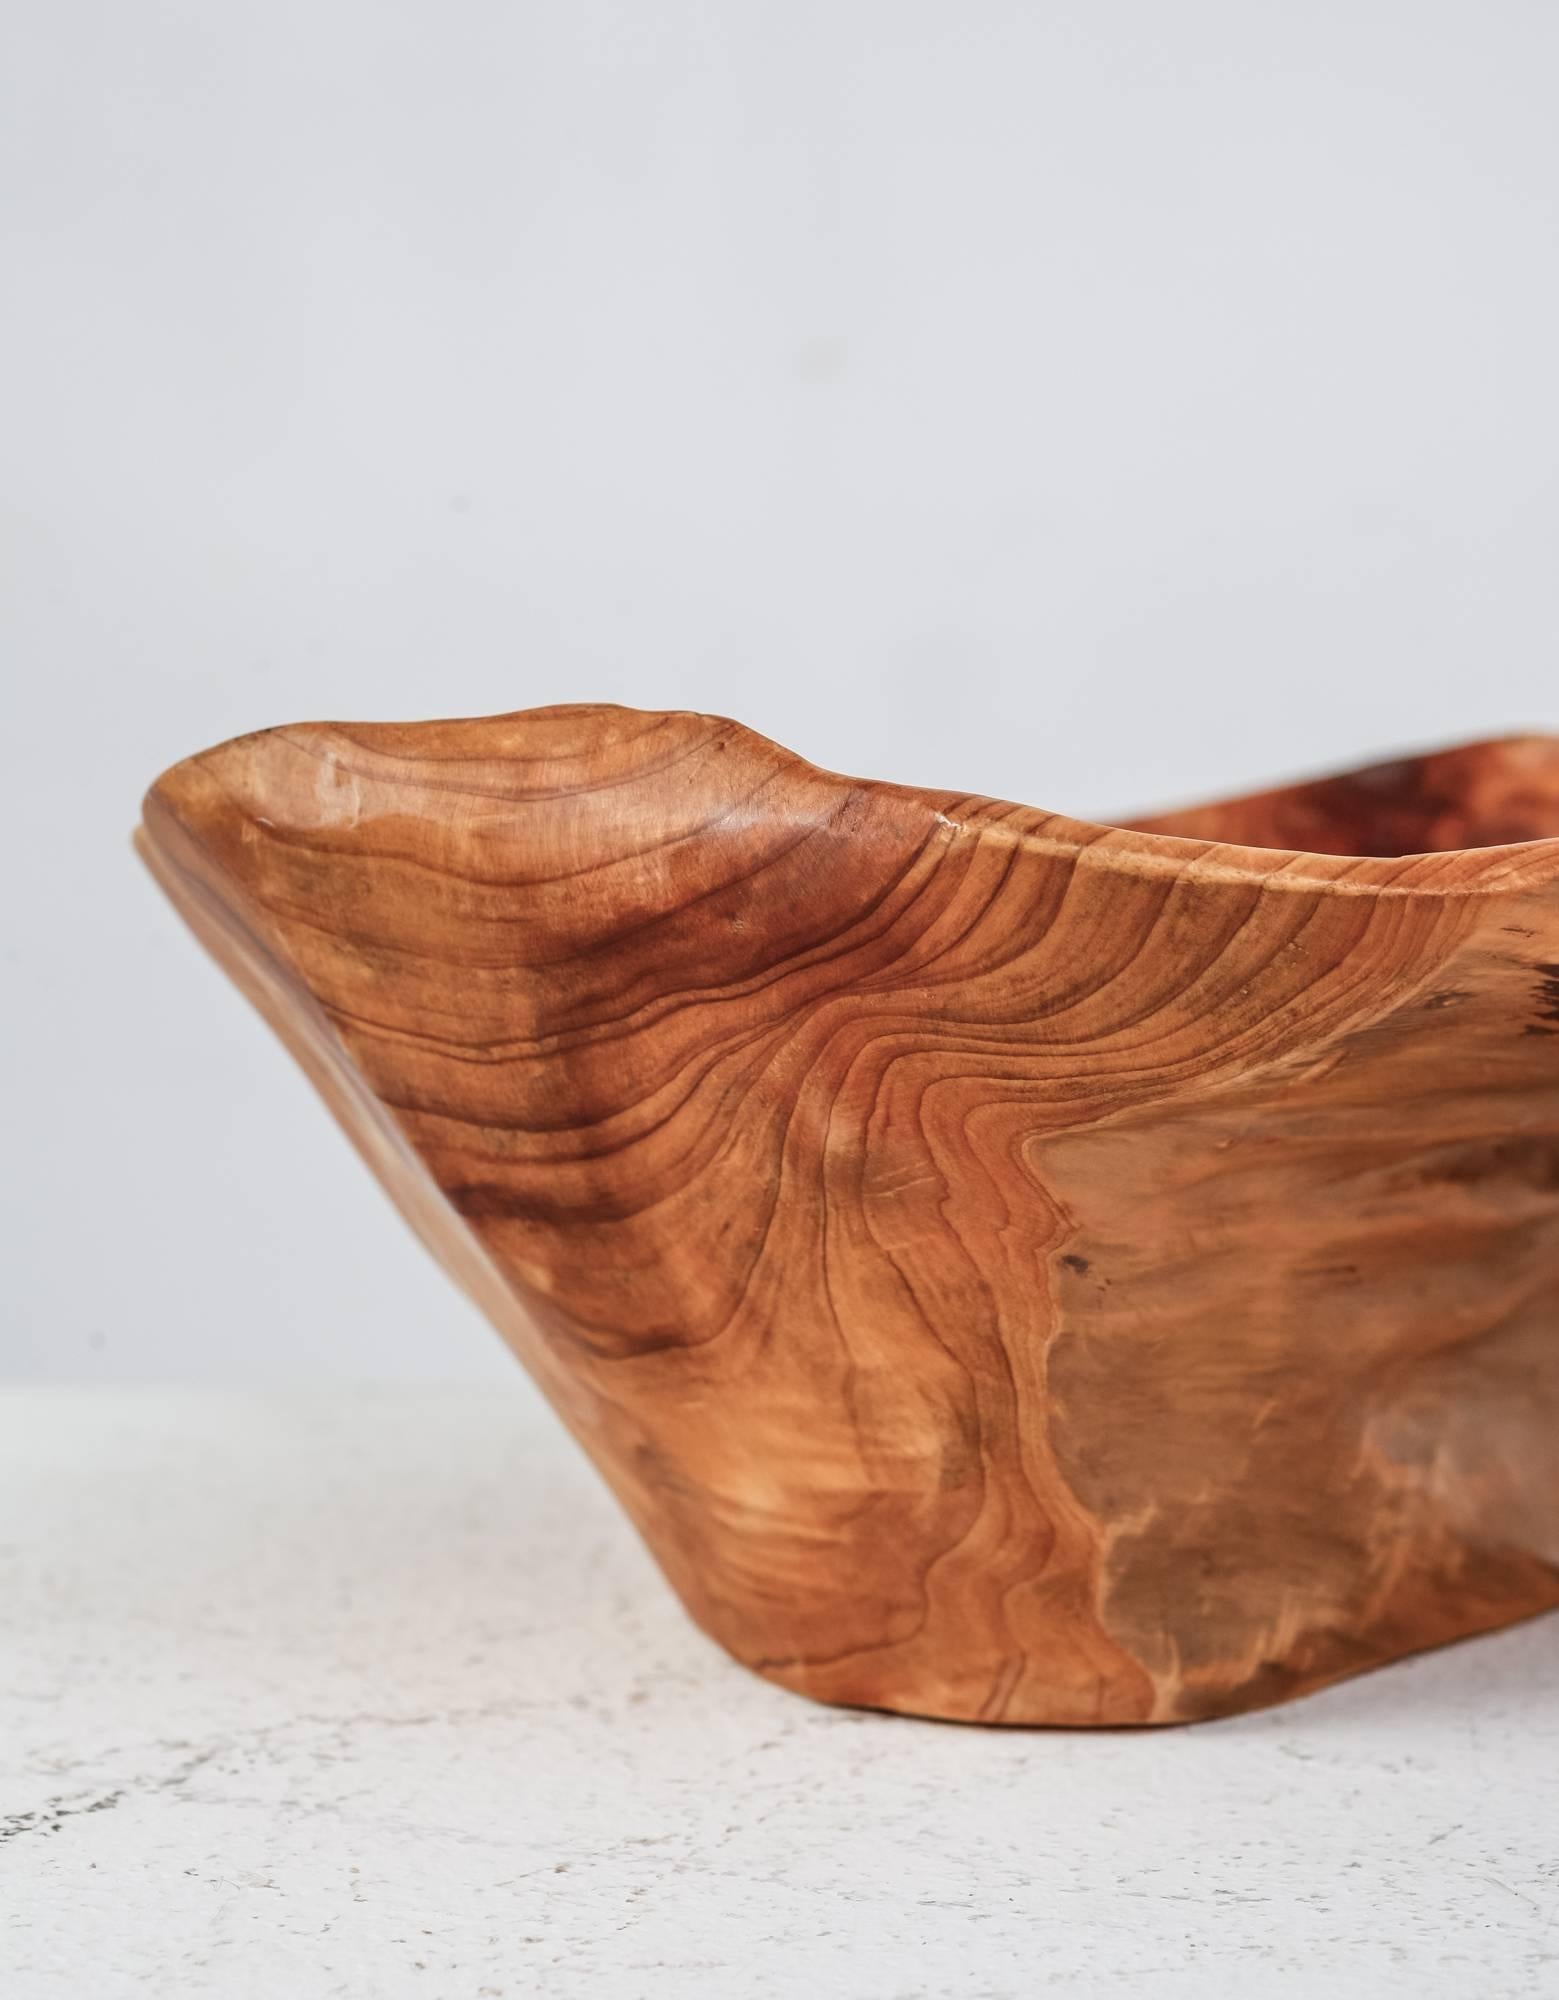 Carved Organically Shaped Wooden Bowl, Signed 'CC 72', USA